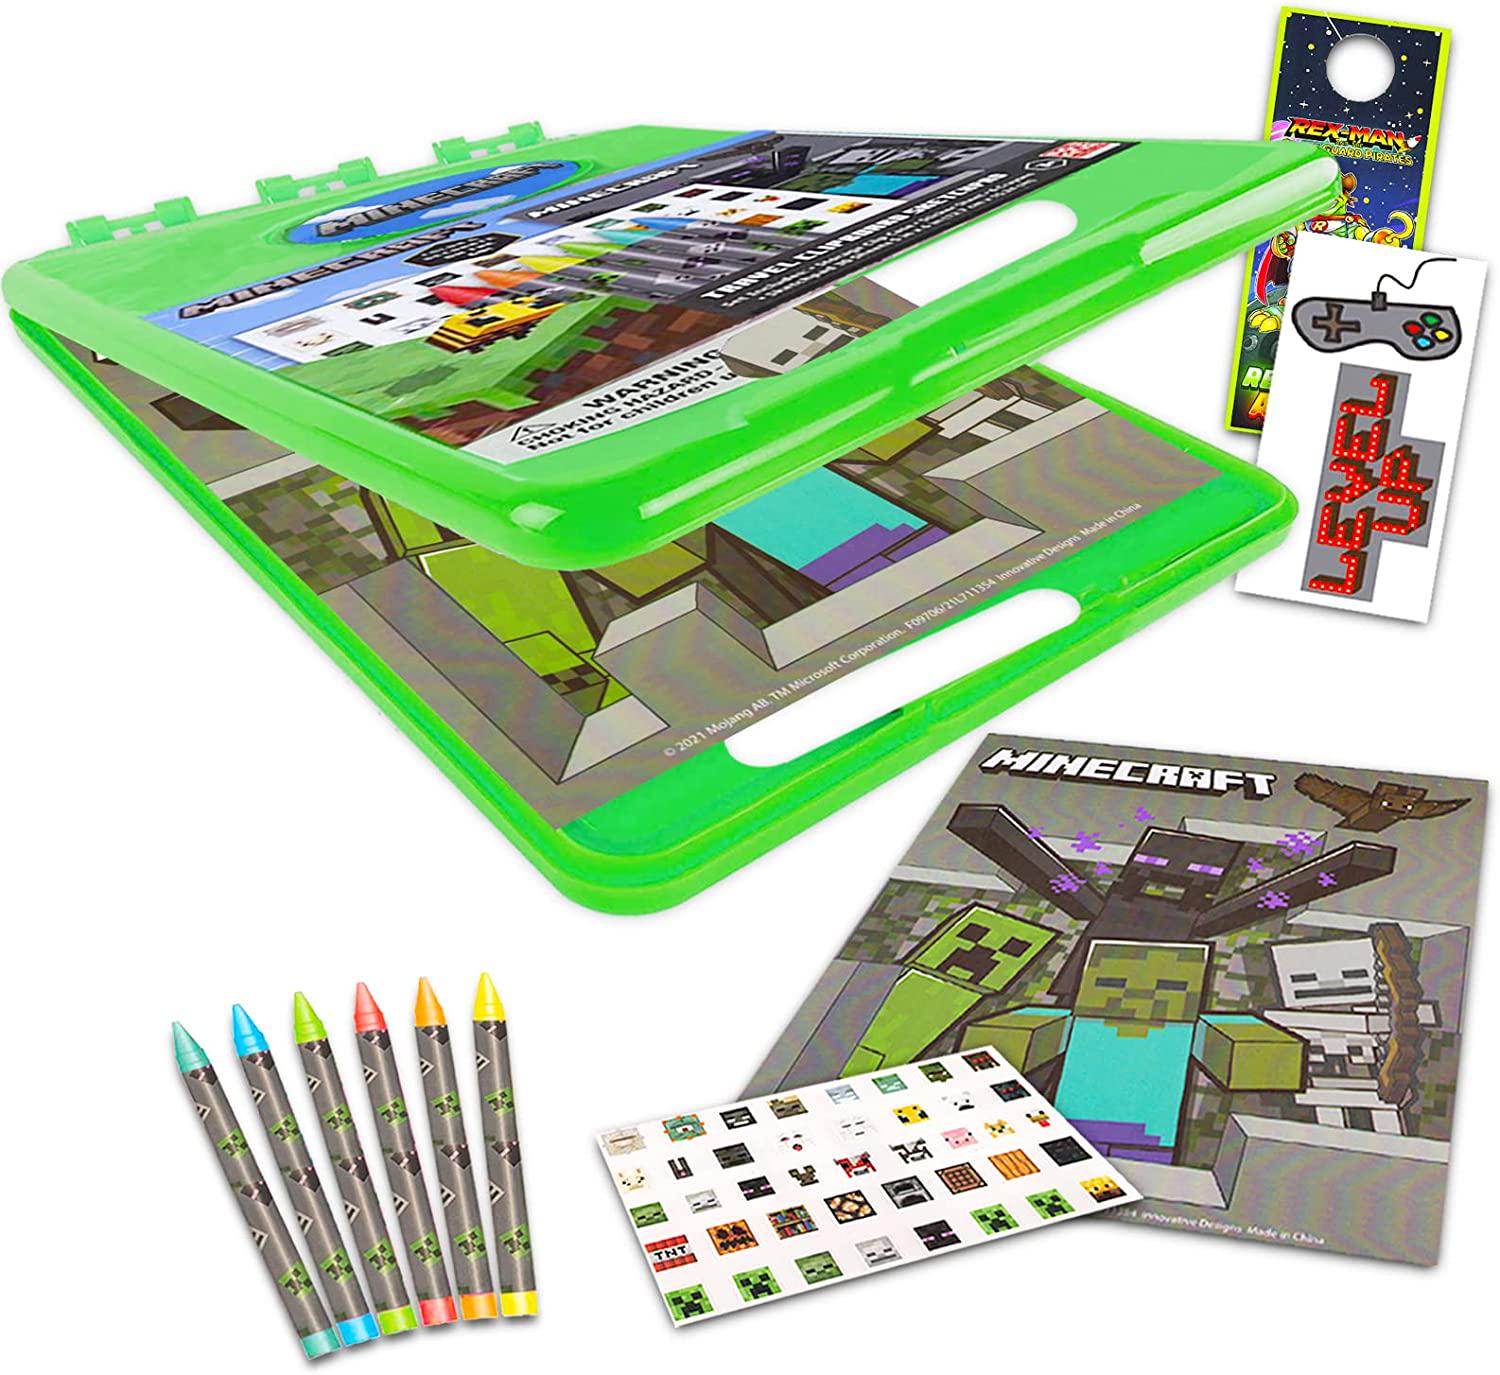 Generic, Minecraft Lap Desk Travel Art Set - Bundle with Minecraft Art Clipboard with Sketchpad and Coloring Utensils Plus Battle Party Stickers and More (Art Lap Desk for Kids)